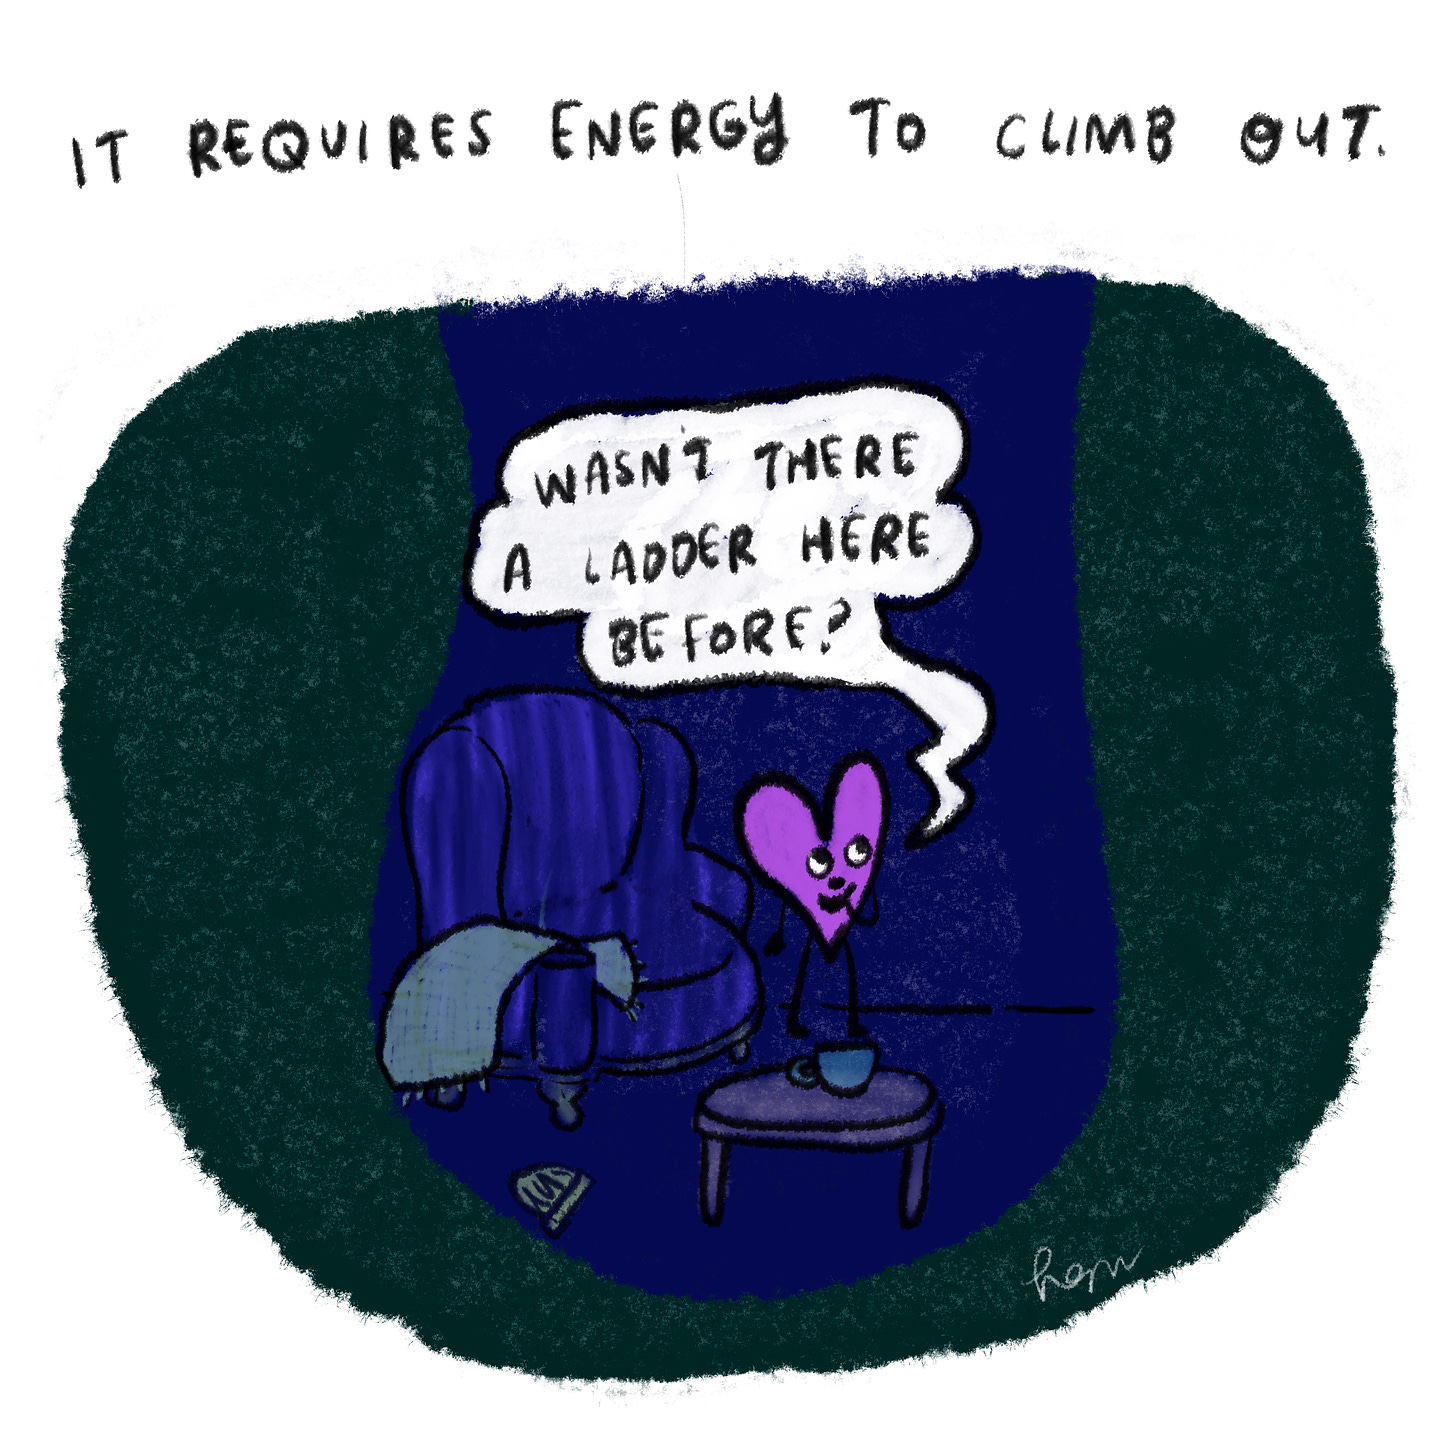 It requires energy to climb out.